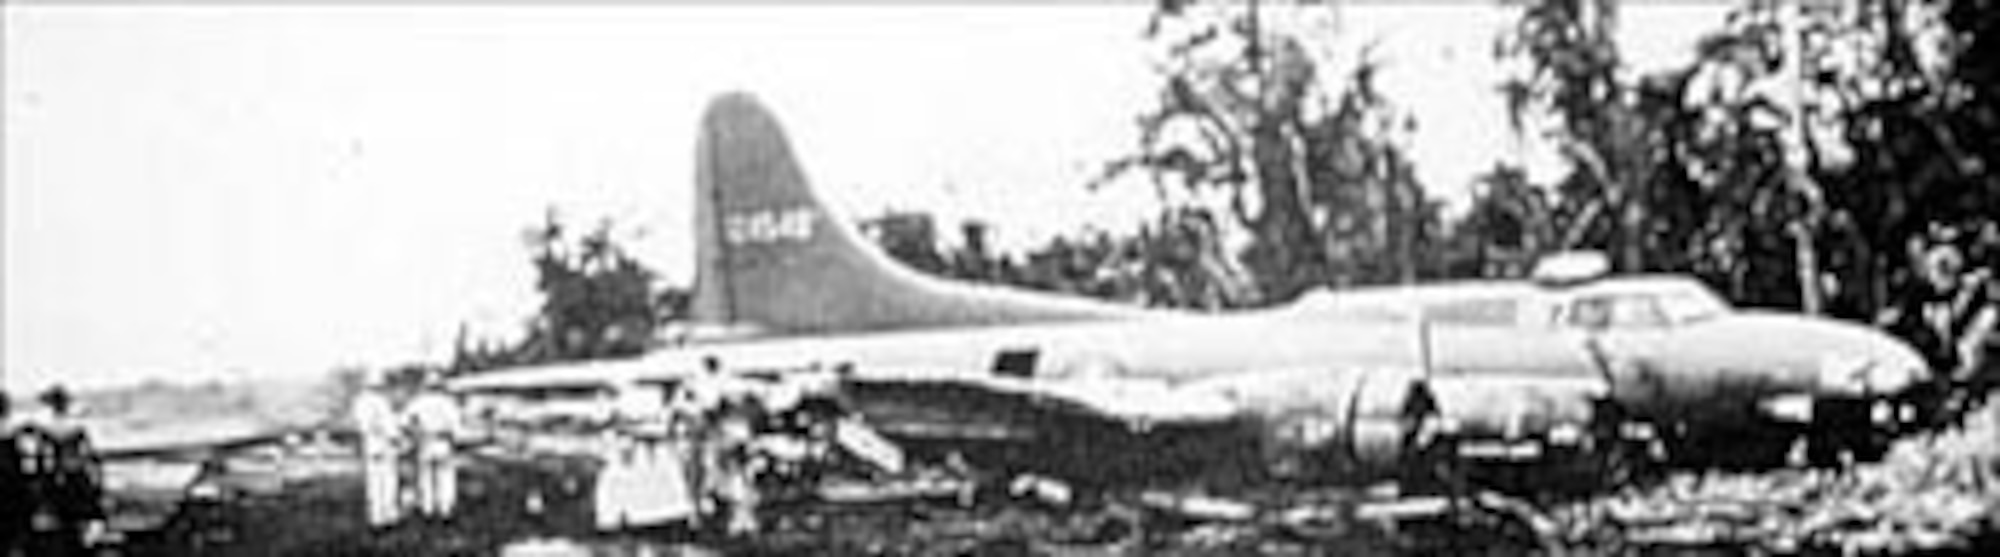 B-17 (S/N 41-24540) after crash-landing in the jungle. (U.S. Air Force photo)